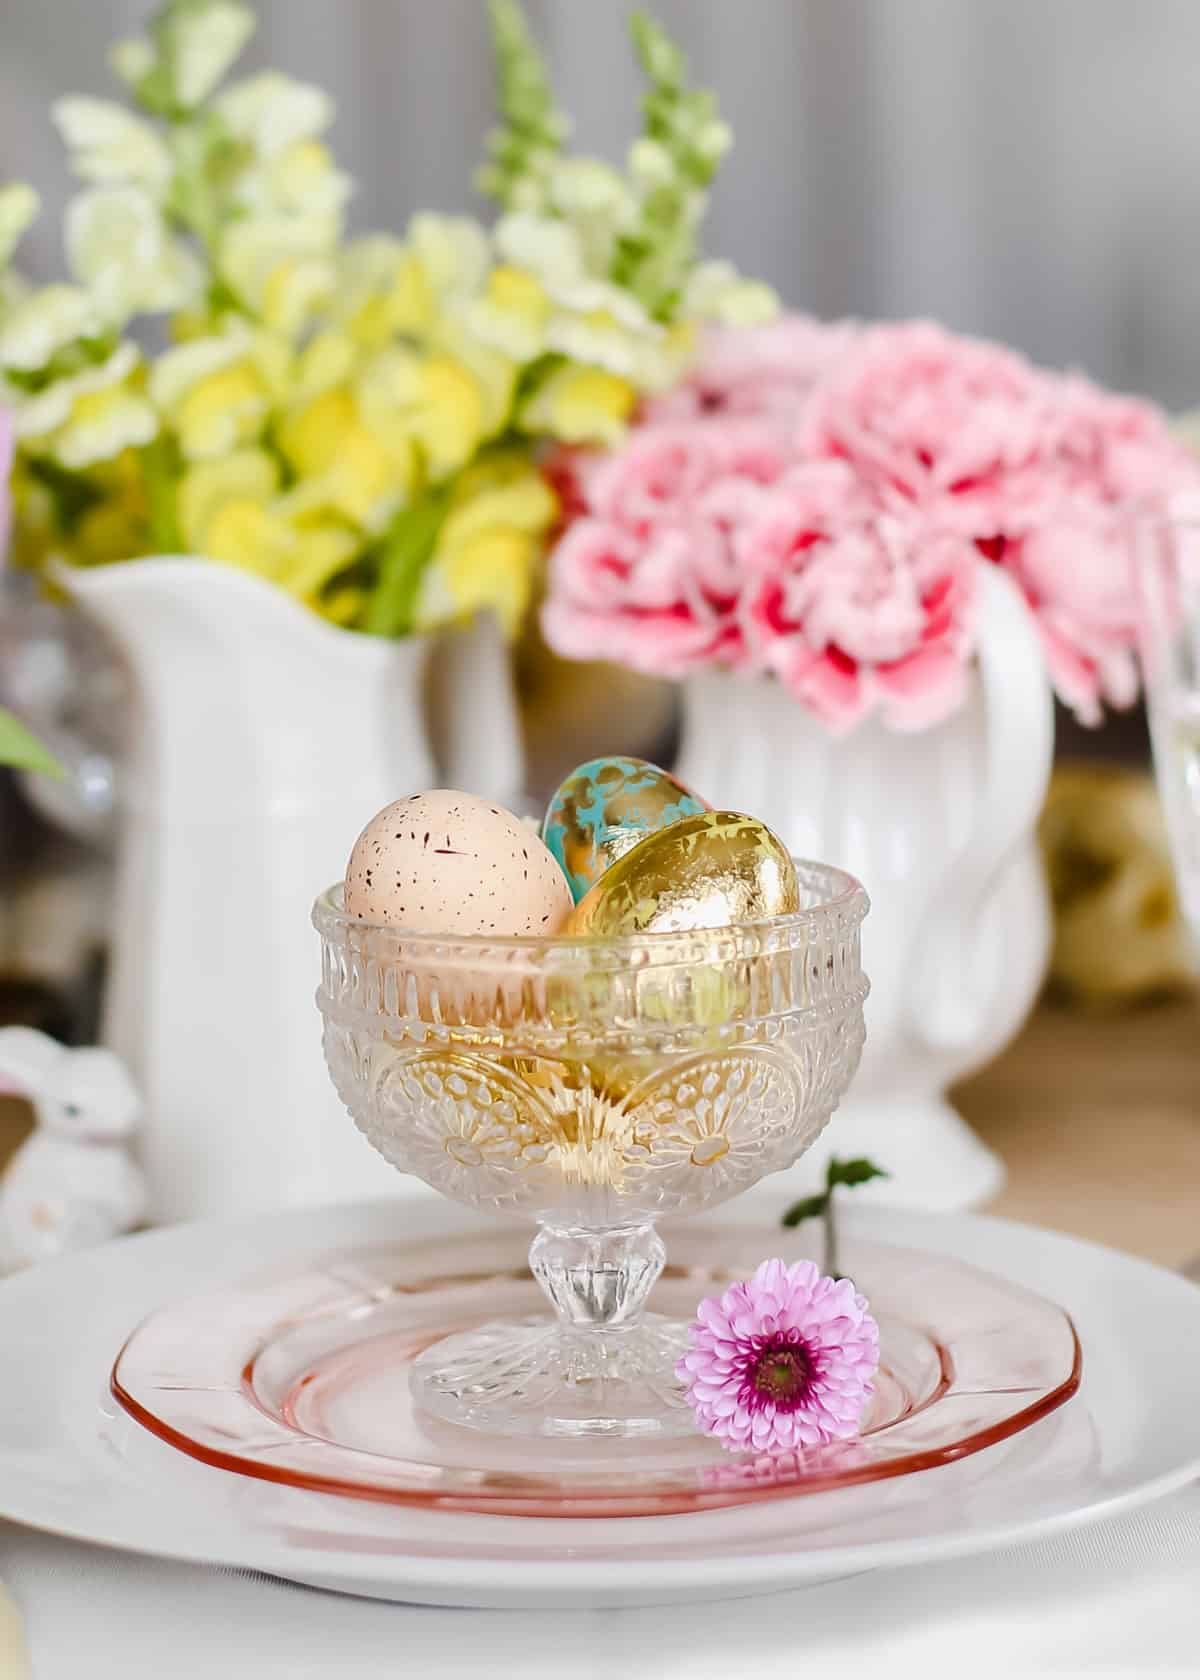 glass compote dish holding decorative eggs for Easter place setting.